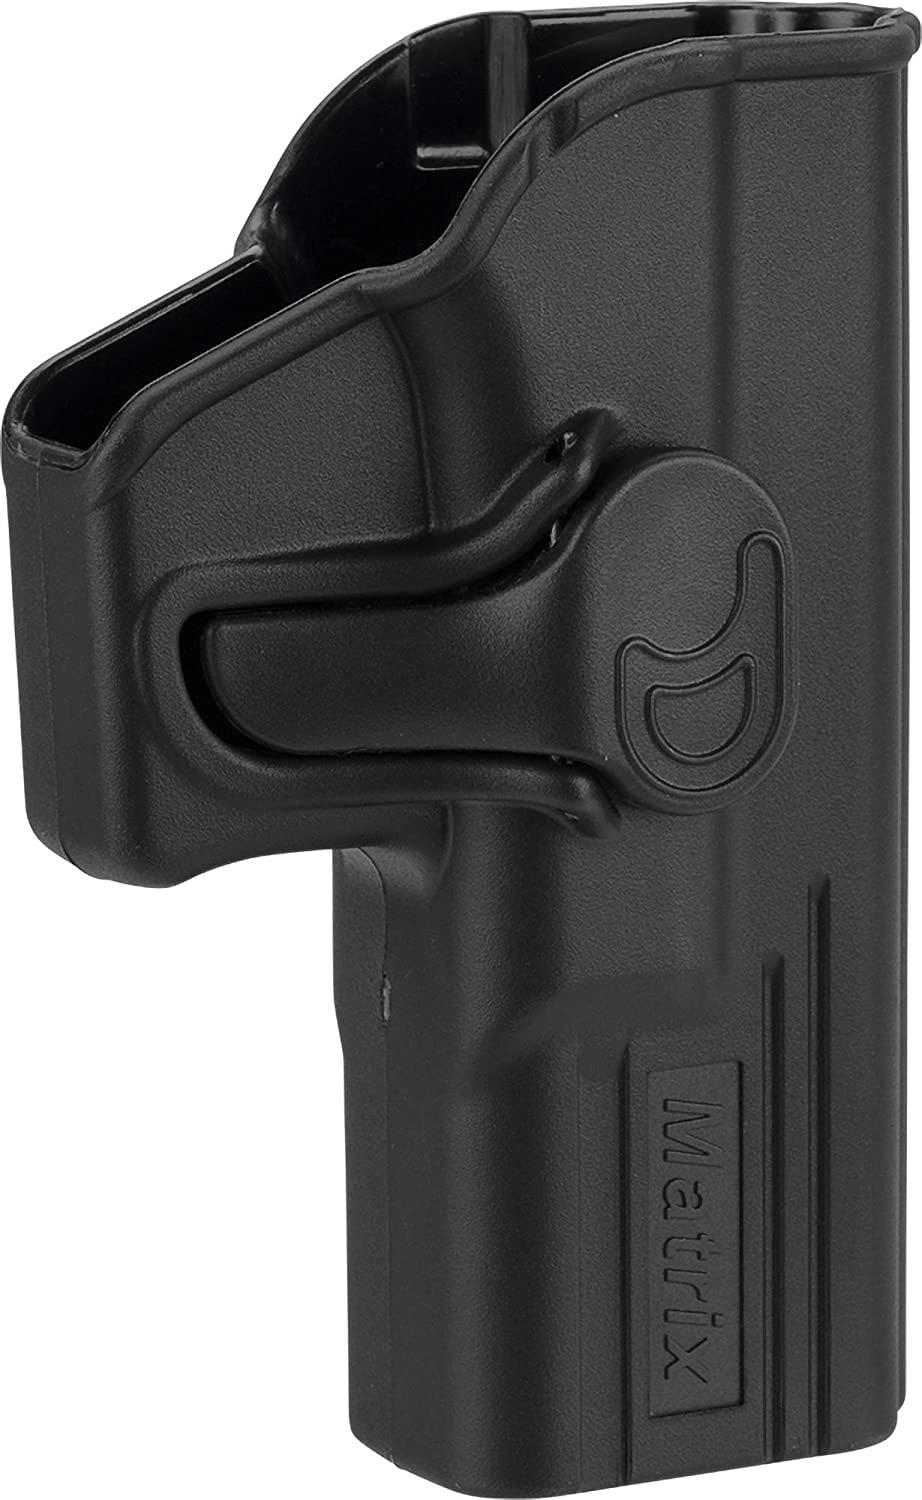 Matrix G3 Hardshell Adjustable Holster for GLOCK G17 Series Pistols (Mount: Paddle Attachment) - Eminent Paintball And Airsoft